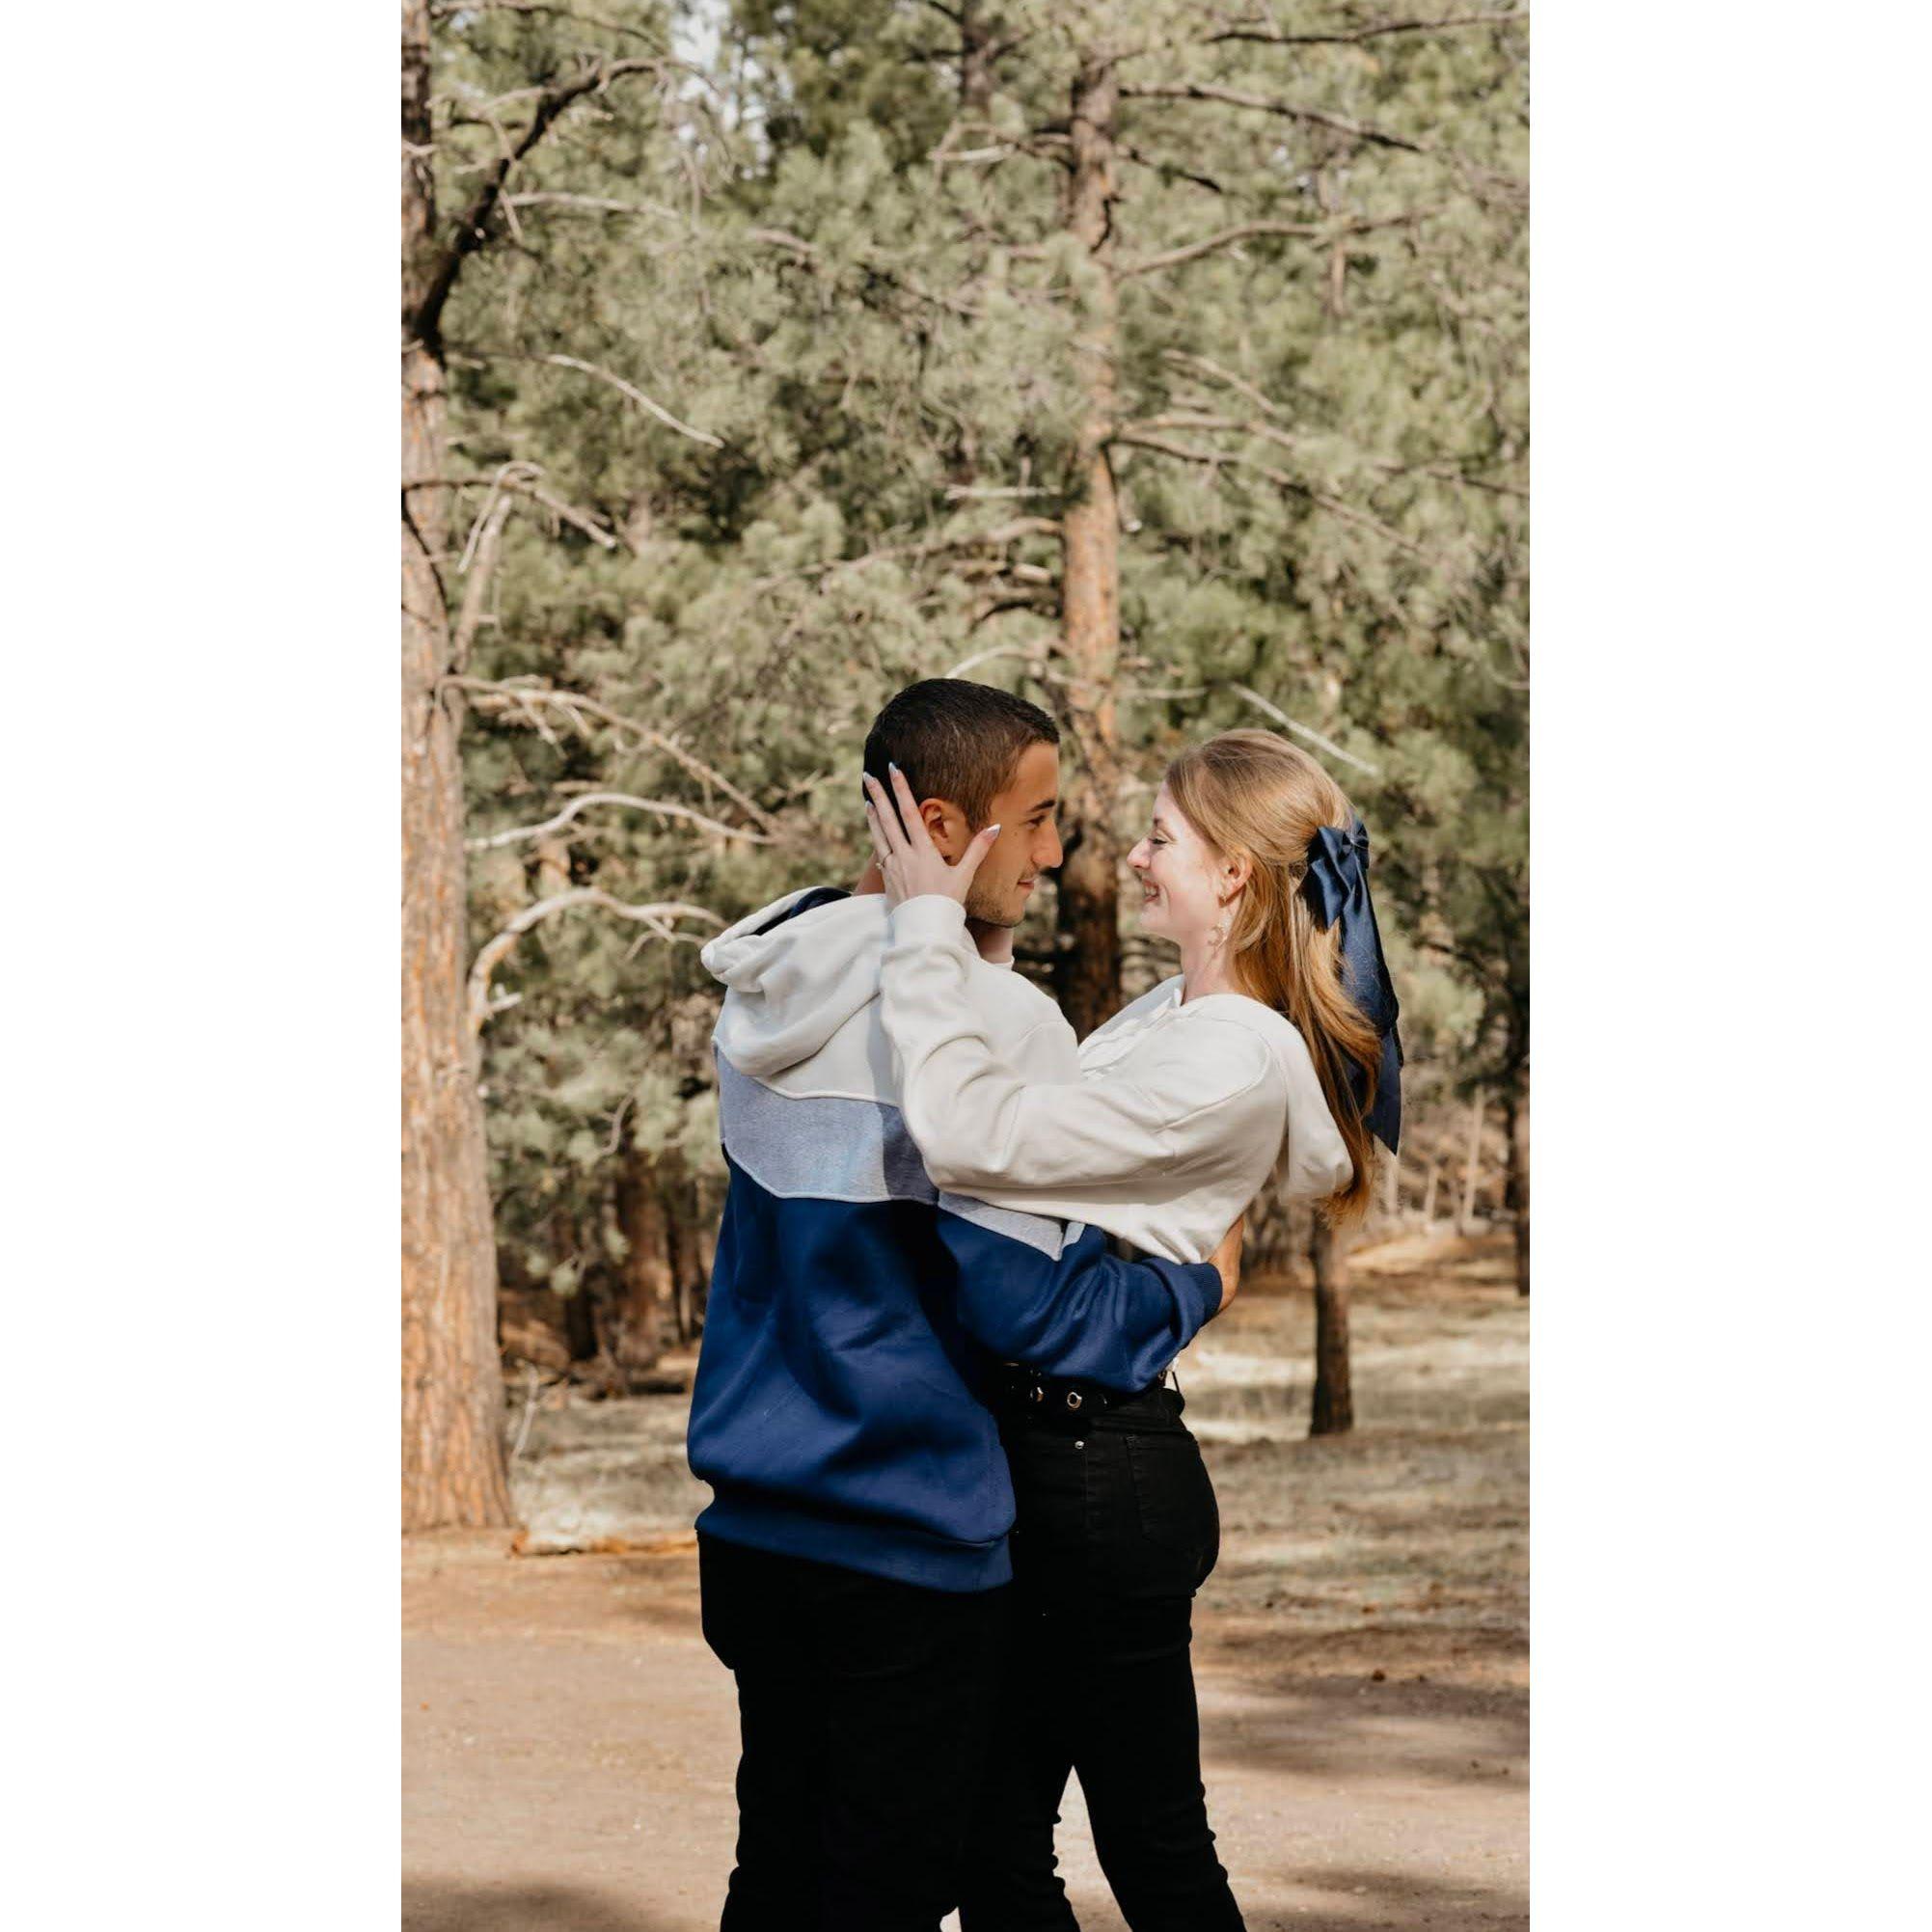 Engagement photos taken in Flagstaff, Arizona right before the couple moved to Tennessee.